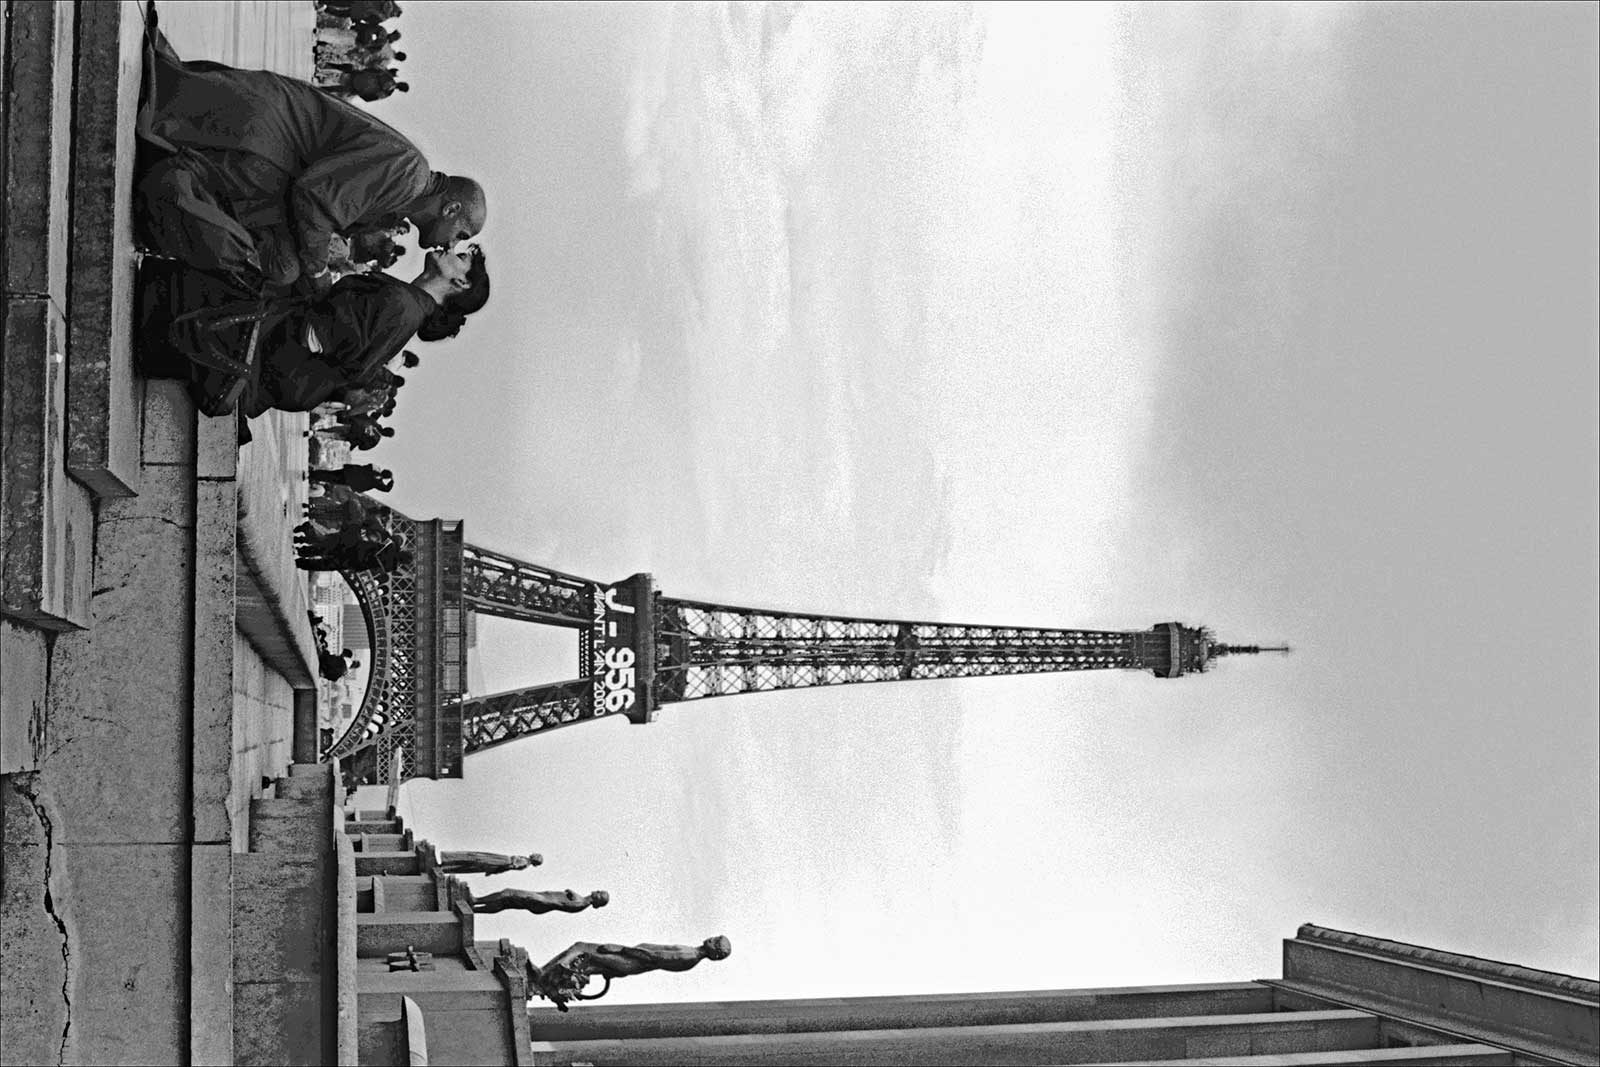 Lovers in Front of the Eiffel Tower - Paris, France